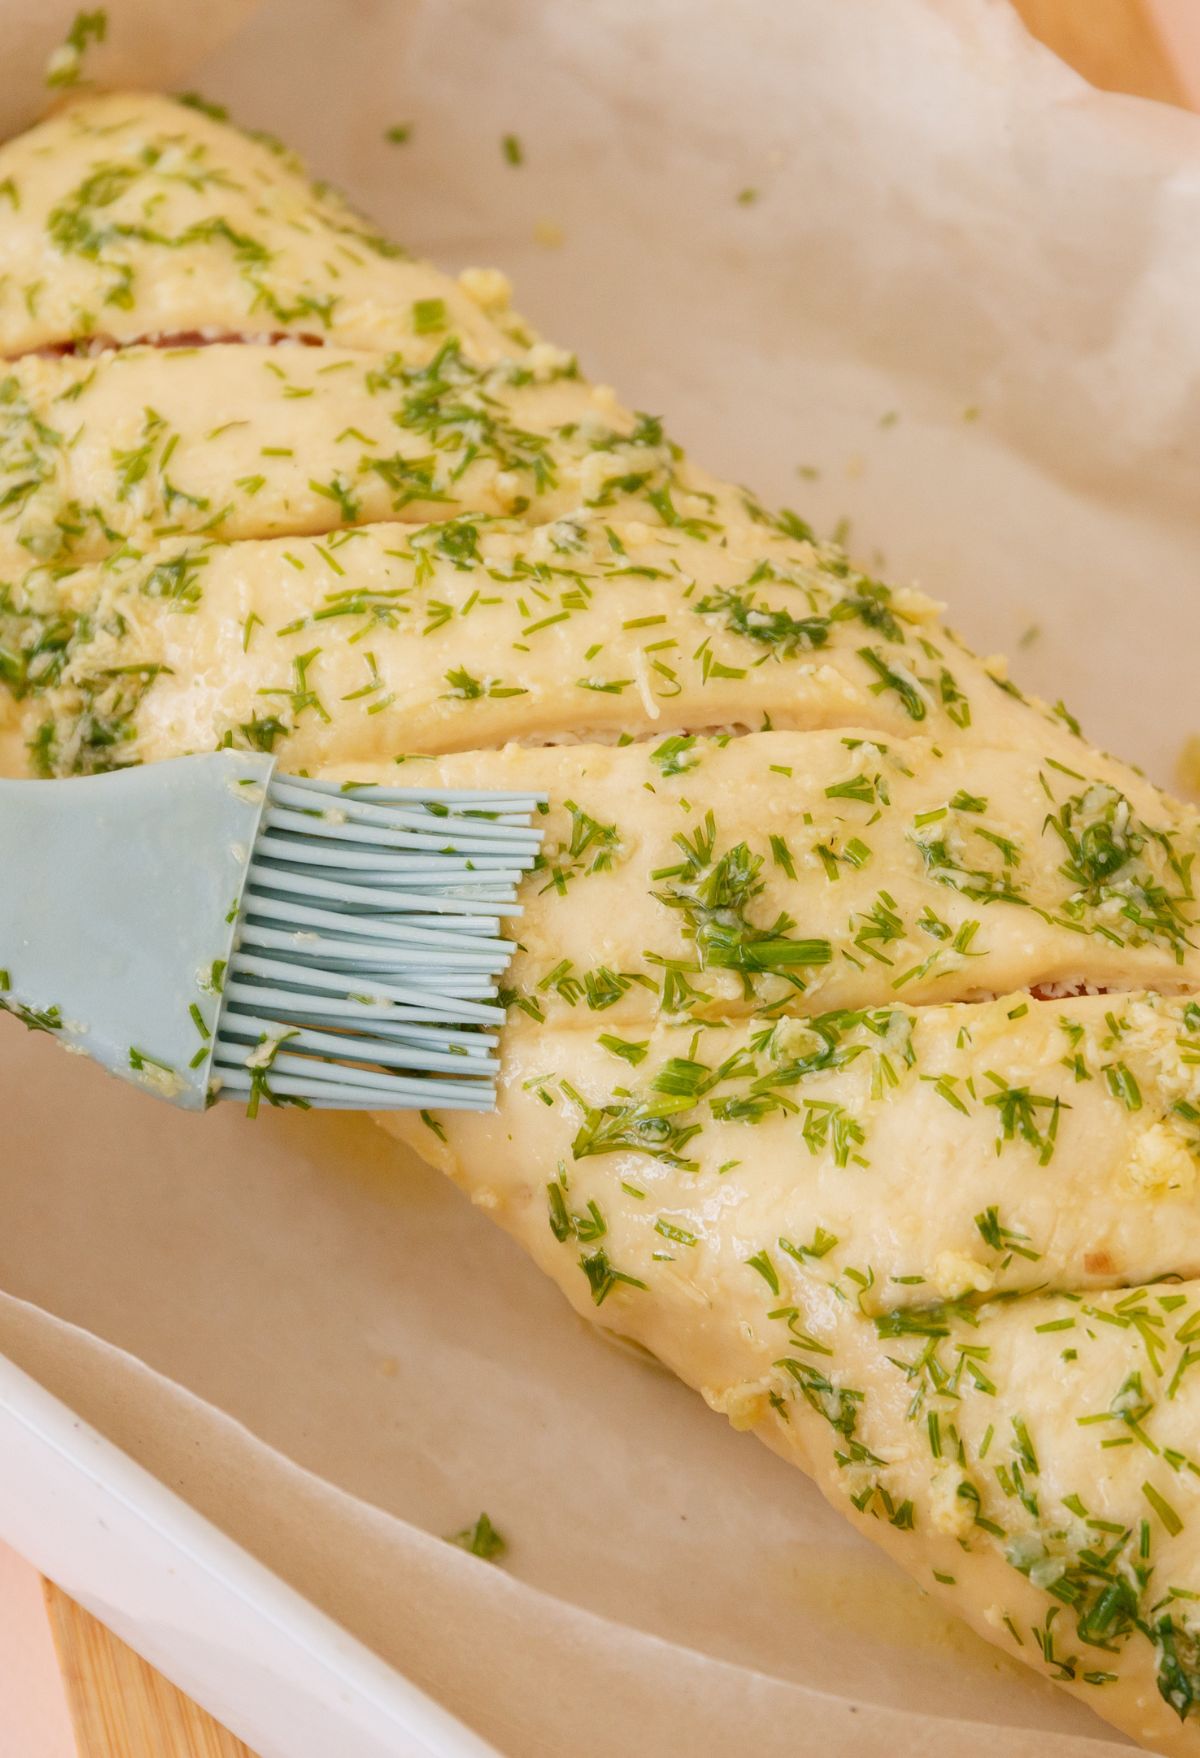 BUTTER AND HERBS ON PIZZA DOUGH.